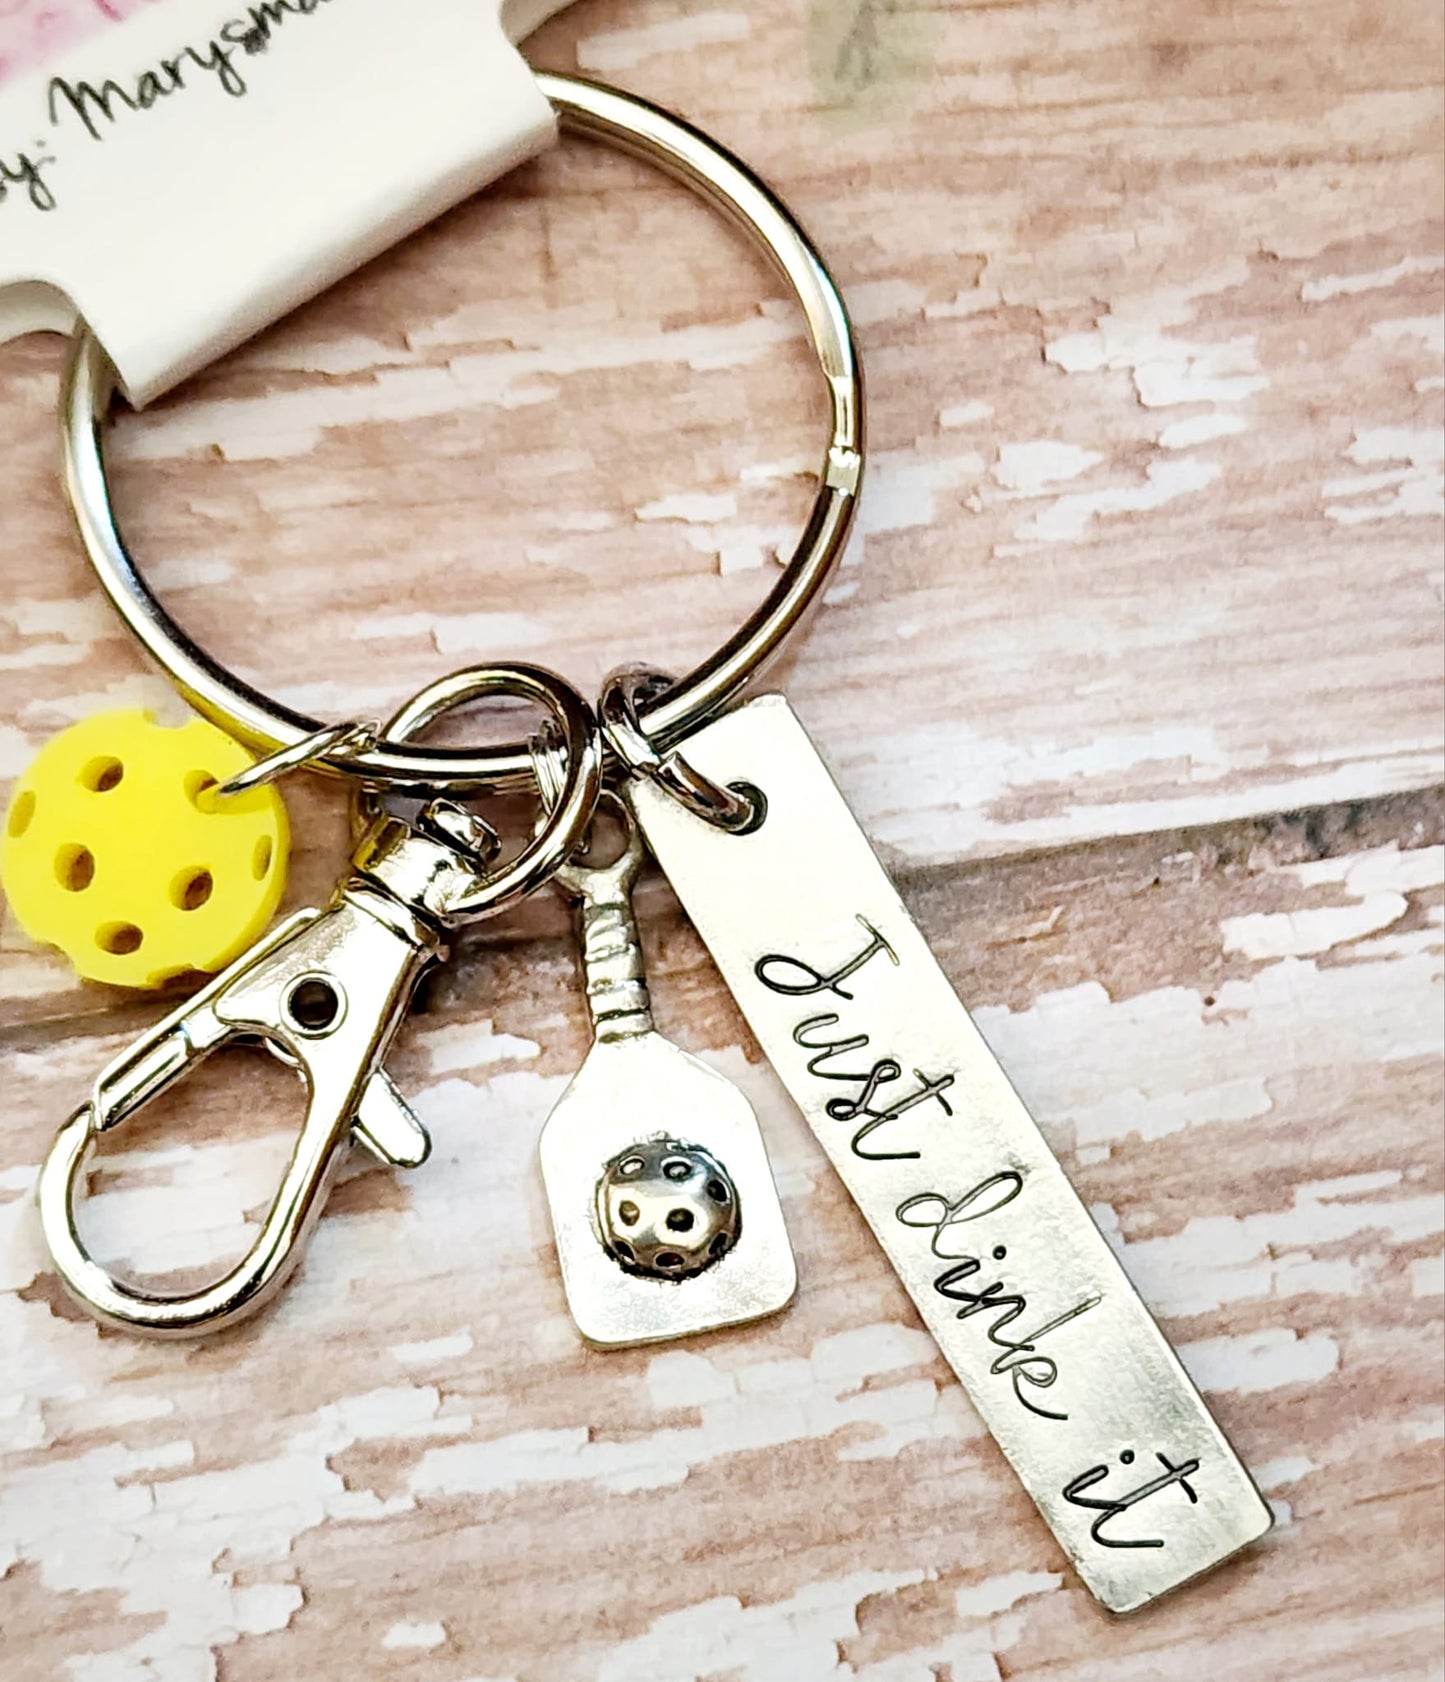 Key Chain Hand Stamped "Just Dink It" with paddle and ball